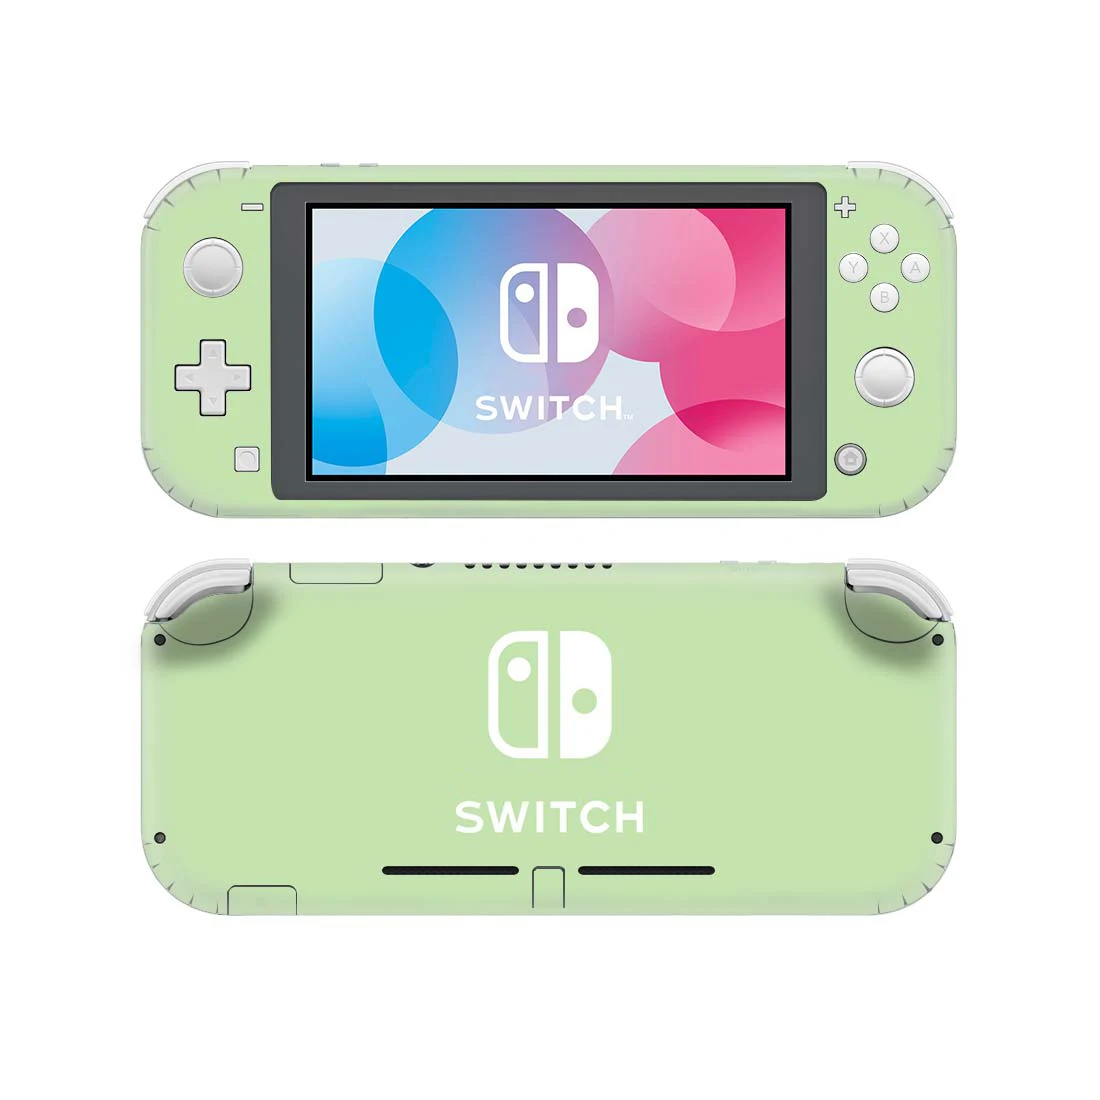 Pure Purple Pink Color NS Switch Skin Sticker Decal For Nintendo Switch Lite Protector Skin Sticker Vinyl